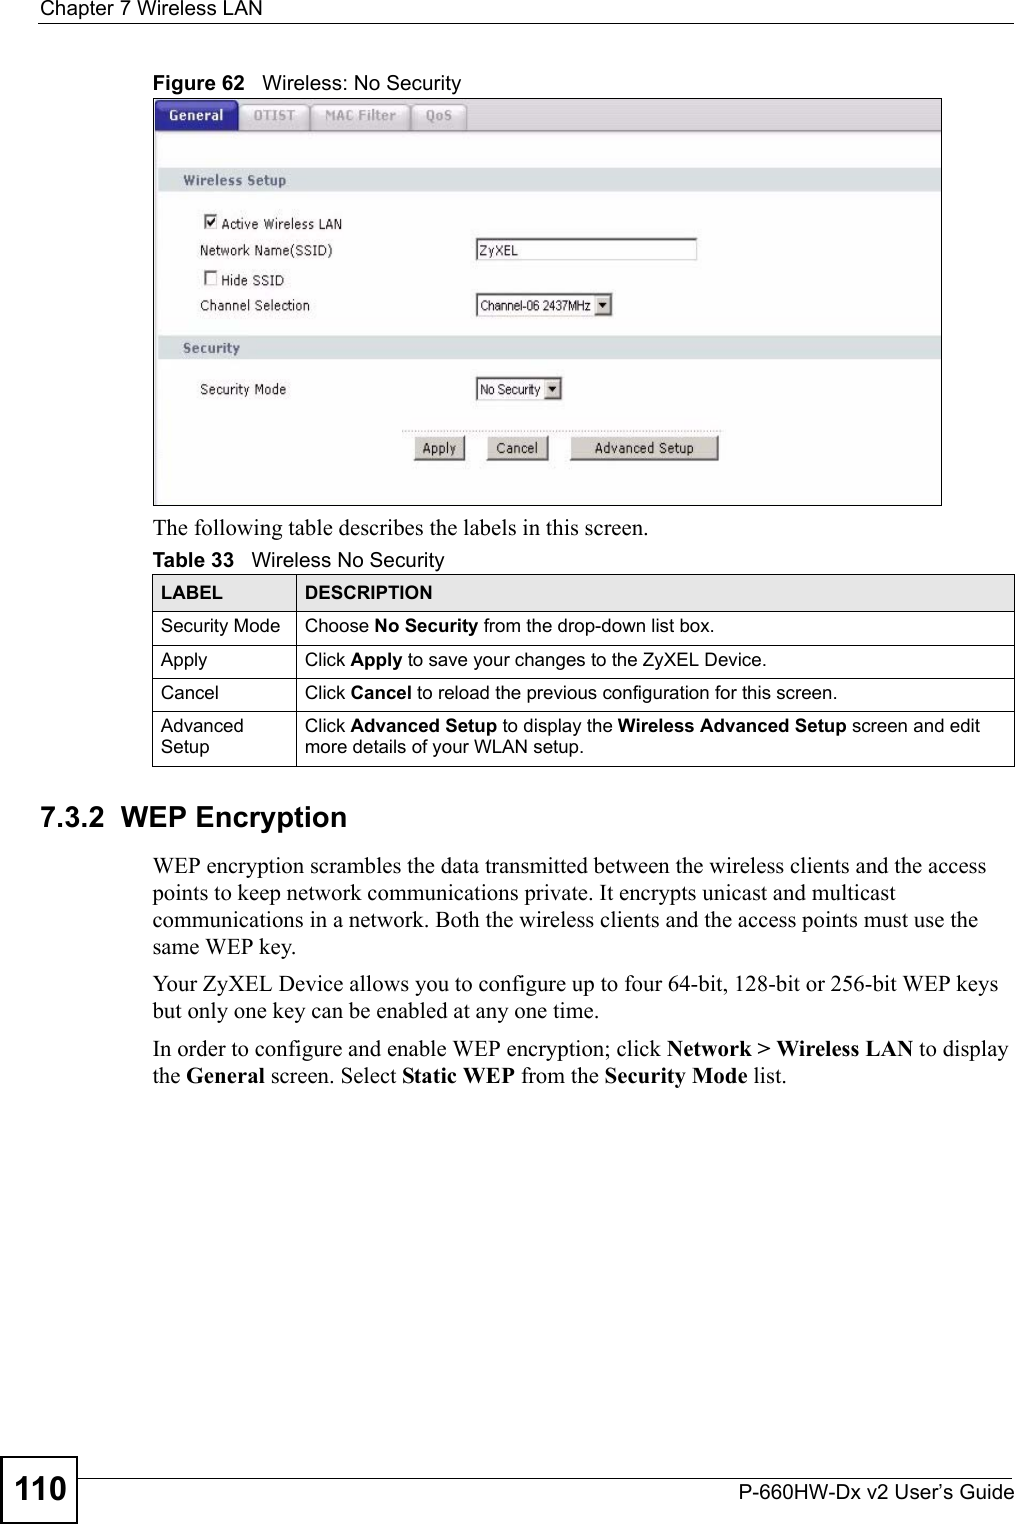 Chapter 7 Wireless LANP-660HW-Dx v2 User’s Guide110Figure 62   Wireless: No SecurityThe following table describes the labels in this screen.7.3.2  WEP EncryptionWEP encryption scrambles the data transmitted between the wireless clients and the access points to keep network communications private. It encrypts unicast and multicast communications in a network. Both the wireless clients and the access points must use the same WEP key.Your ZyXEL Device allows you to configure up to four 64-bit, 128-bit or 256-bit WEP keys but only one key can be enabled at any one time.In order to configure and enable WEP encryption; click Network &gt; Wireless LAN to display the General screen. Select Static WEP from the Security Mode list.Table 33   Wireless No SecurityLABEL DESCRIPTIONSecurity Mode Choose No Security from the drop-down list box.Apply Click Apply to save your changes to the ZyXEL Device.Cancel Click Cancel to reload the previous configuration for this screen.Advanced SetupClick Advanced Setup to display the Wireless Advanced Setup screen and edit more details of your WLAN setup.